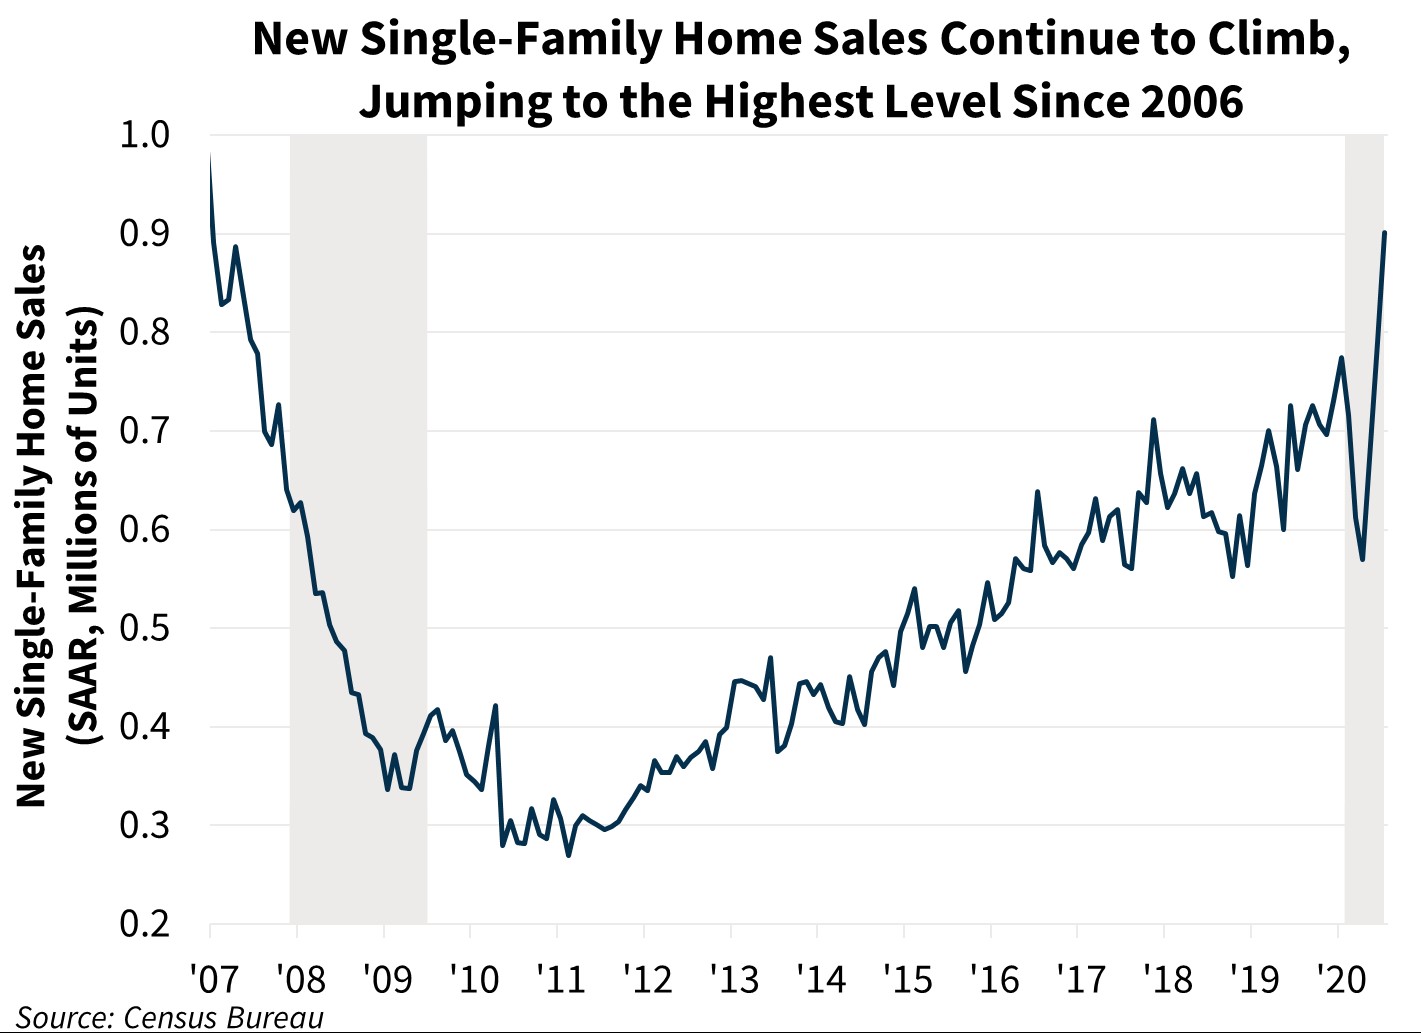  New Single-Family Home Sales Continue to Climb, Jumping to the Highest Level Since 2006